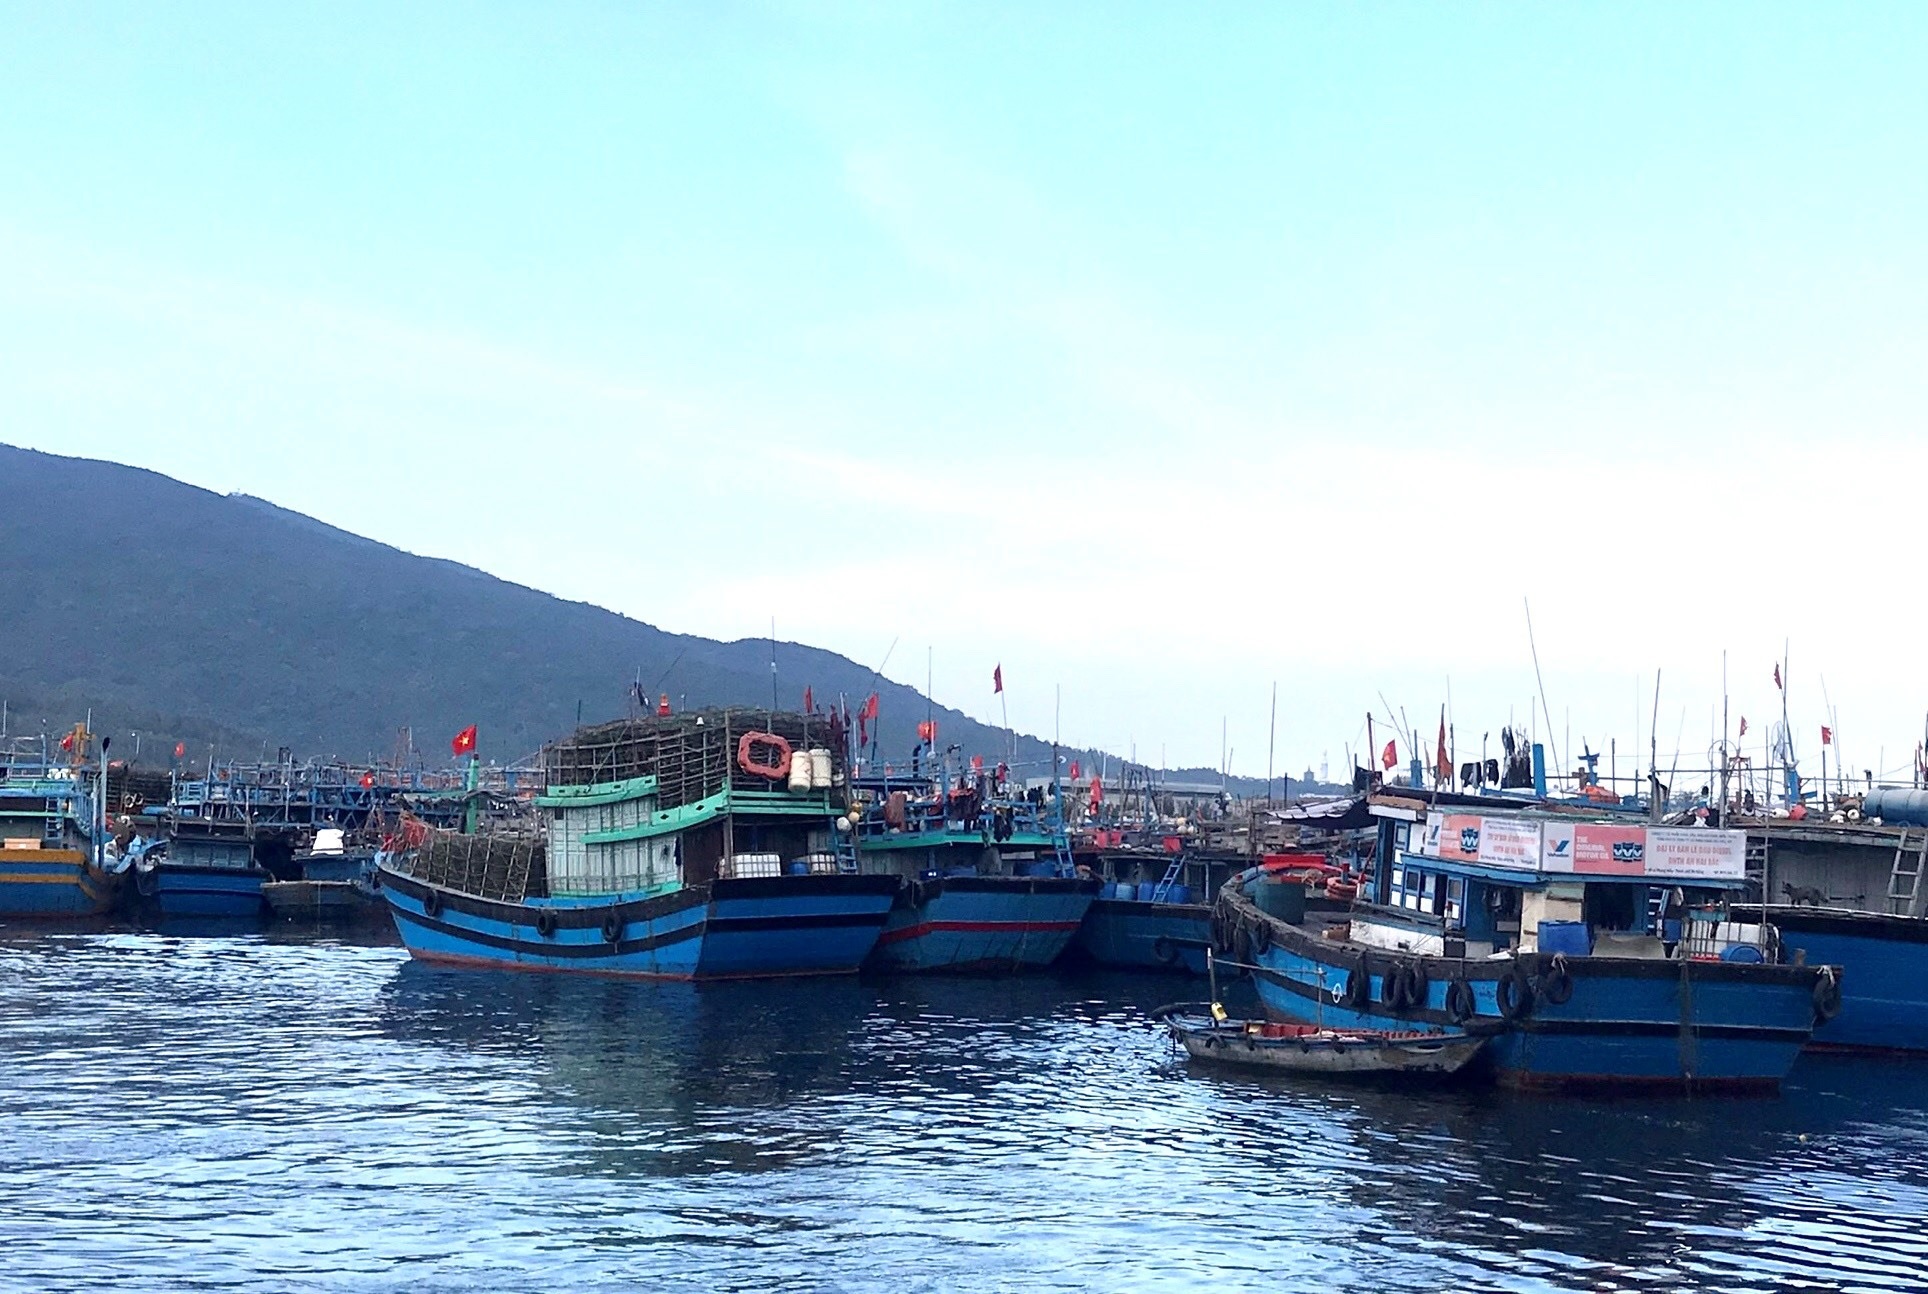 Vietnam is striving for the goal of having 184 fishing ports by 2050